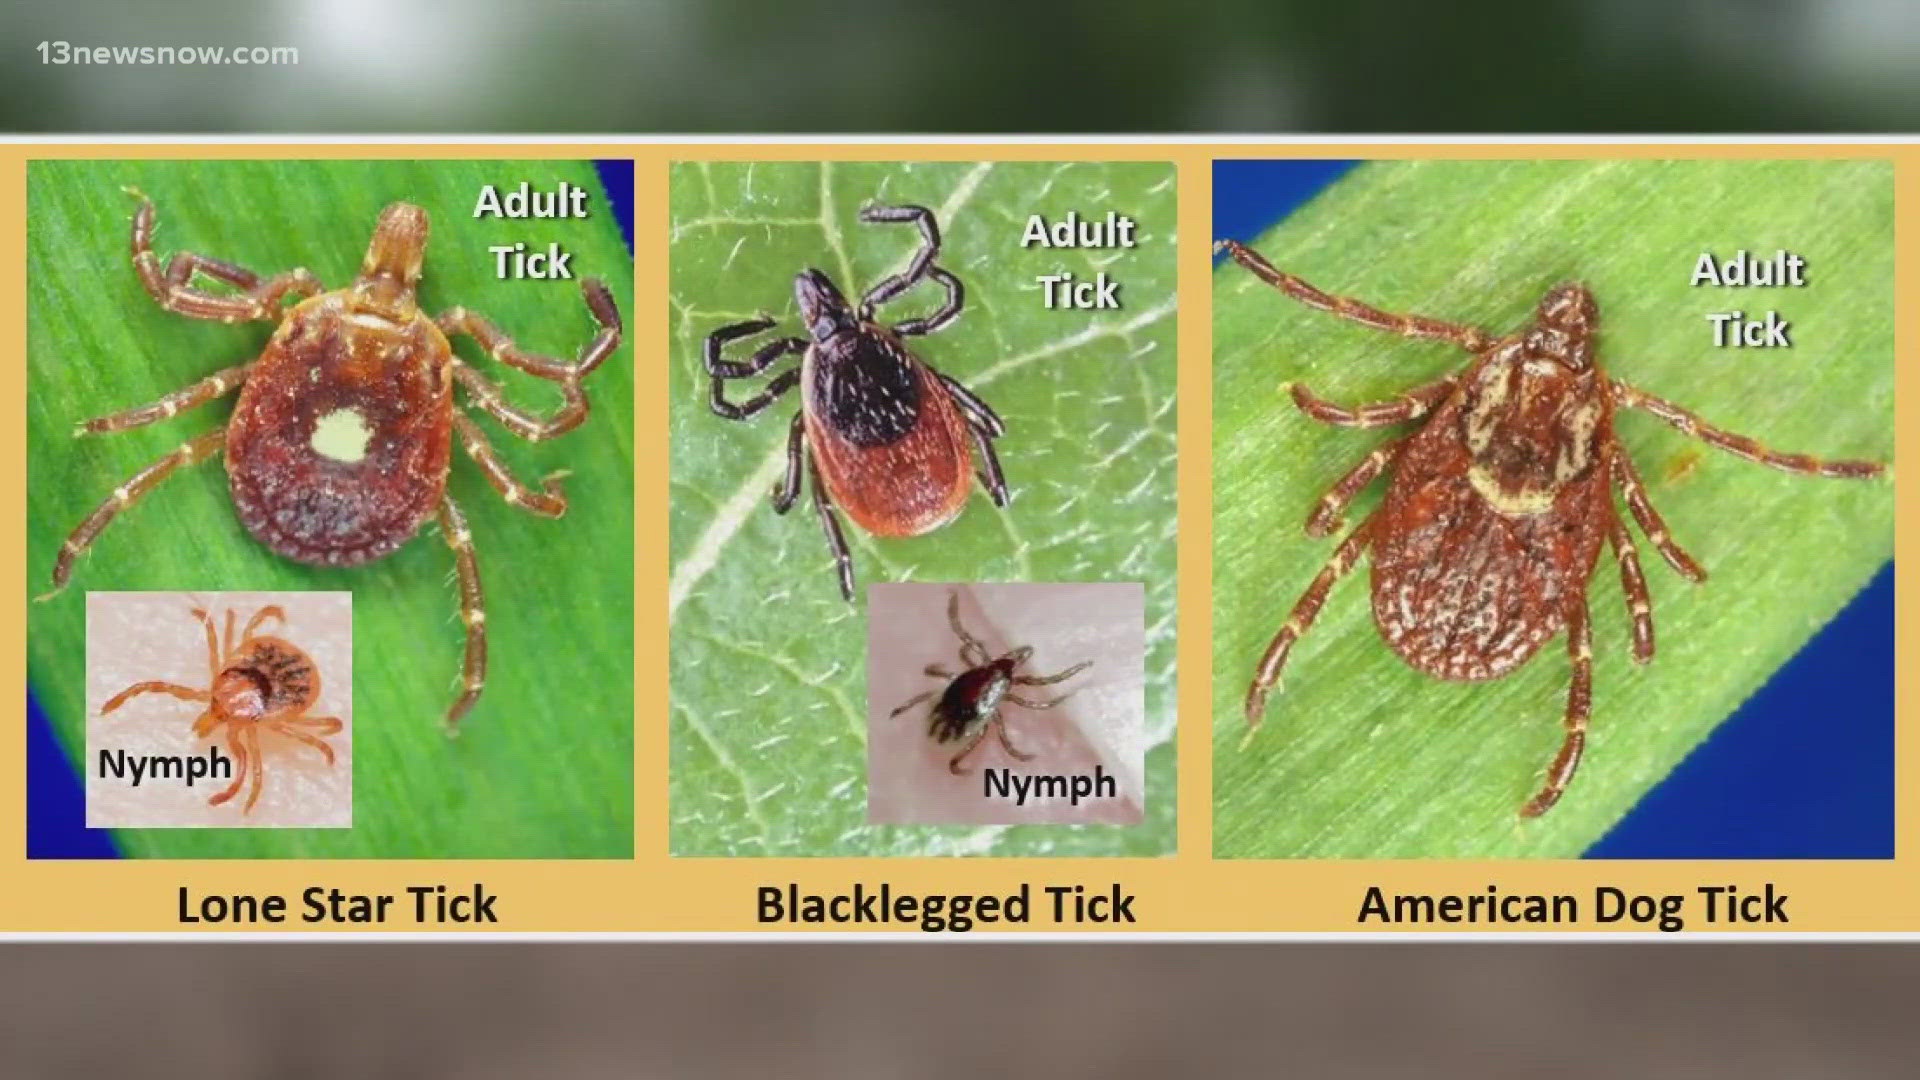 Know how to protect yourself from biting ticks. The most common in Virginia are Blackegged, American Dog and Lone Star ticks.